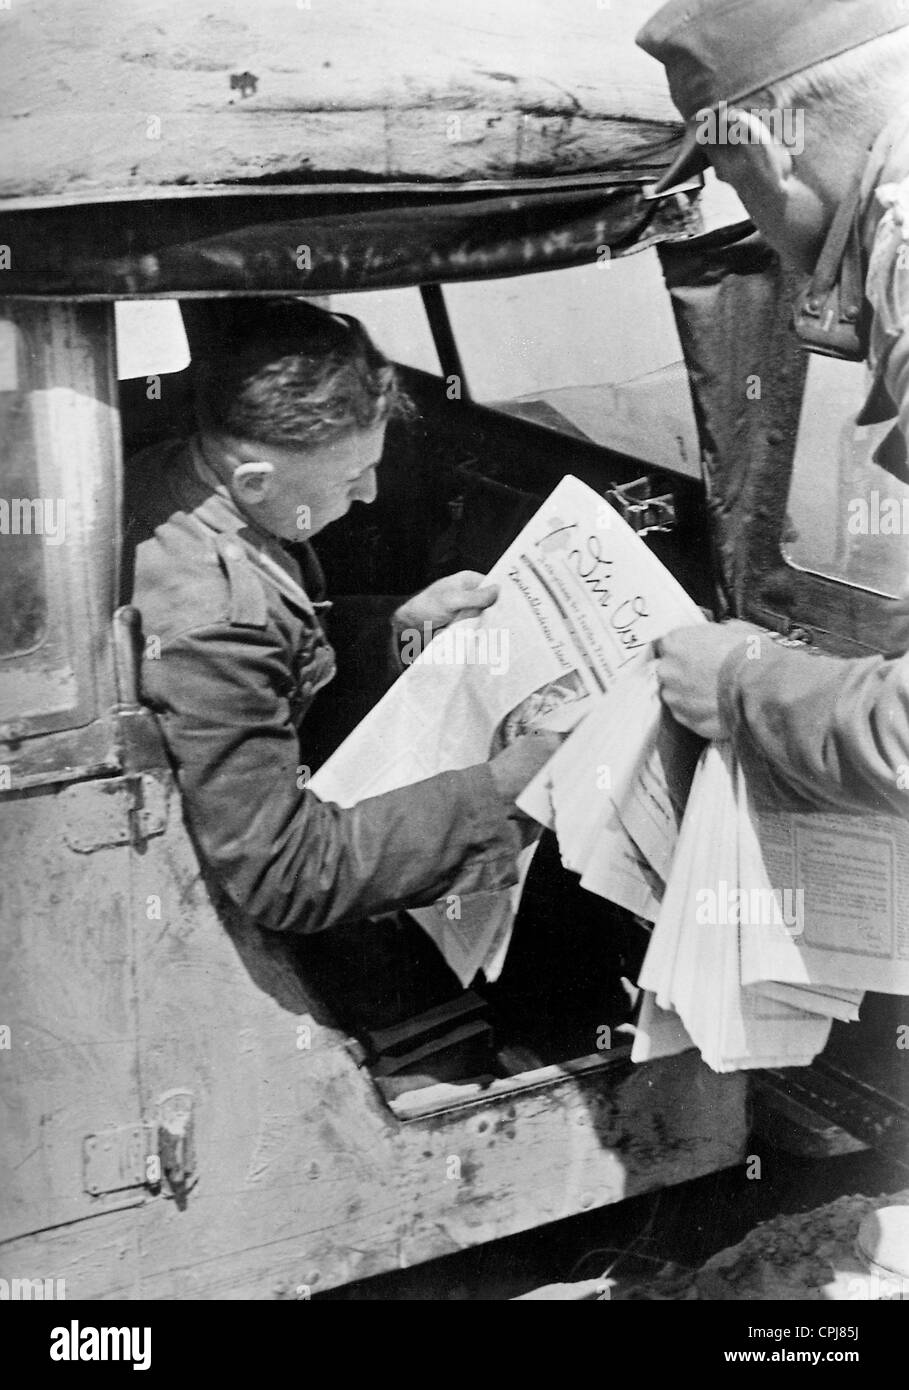 A soldier reads the front newspaper 'Die Oase', 1941 Stock Photo